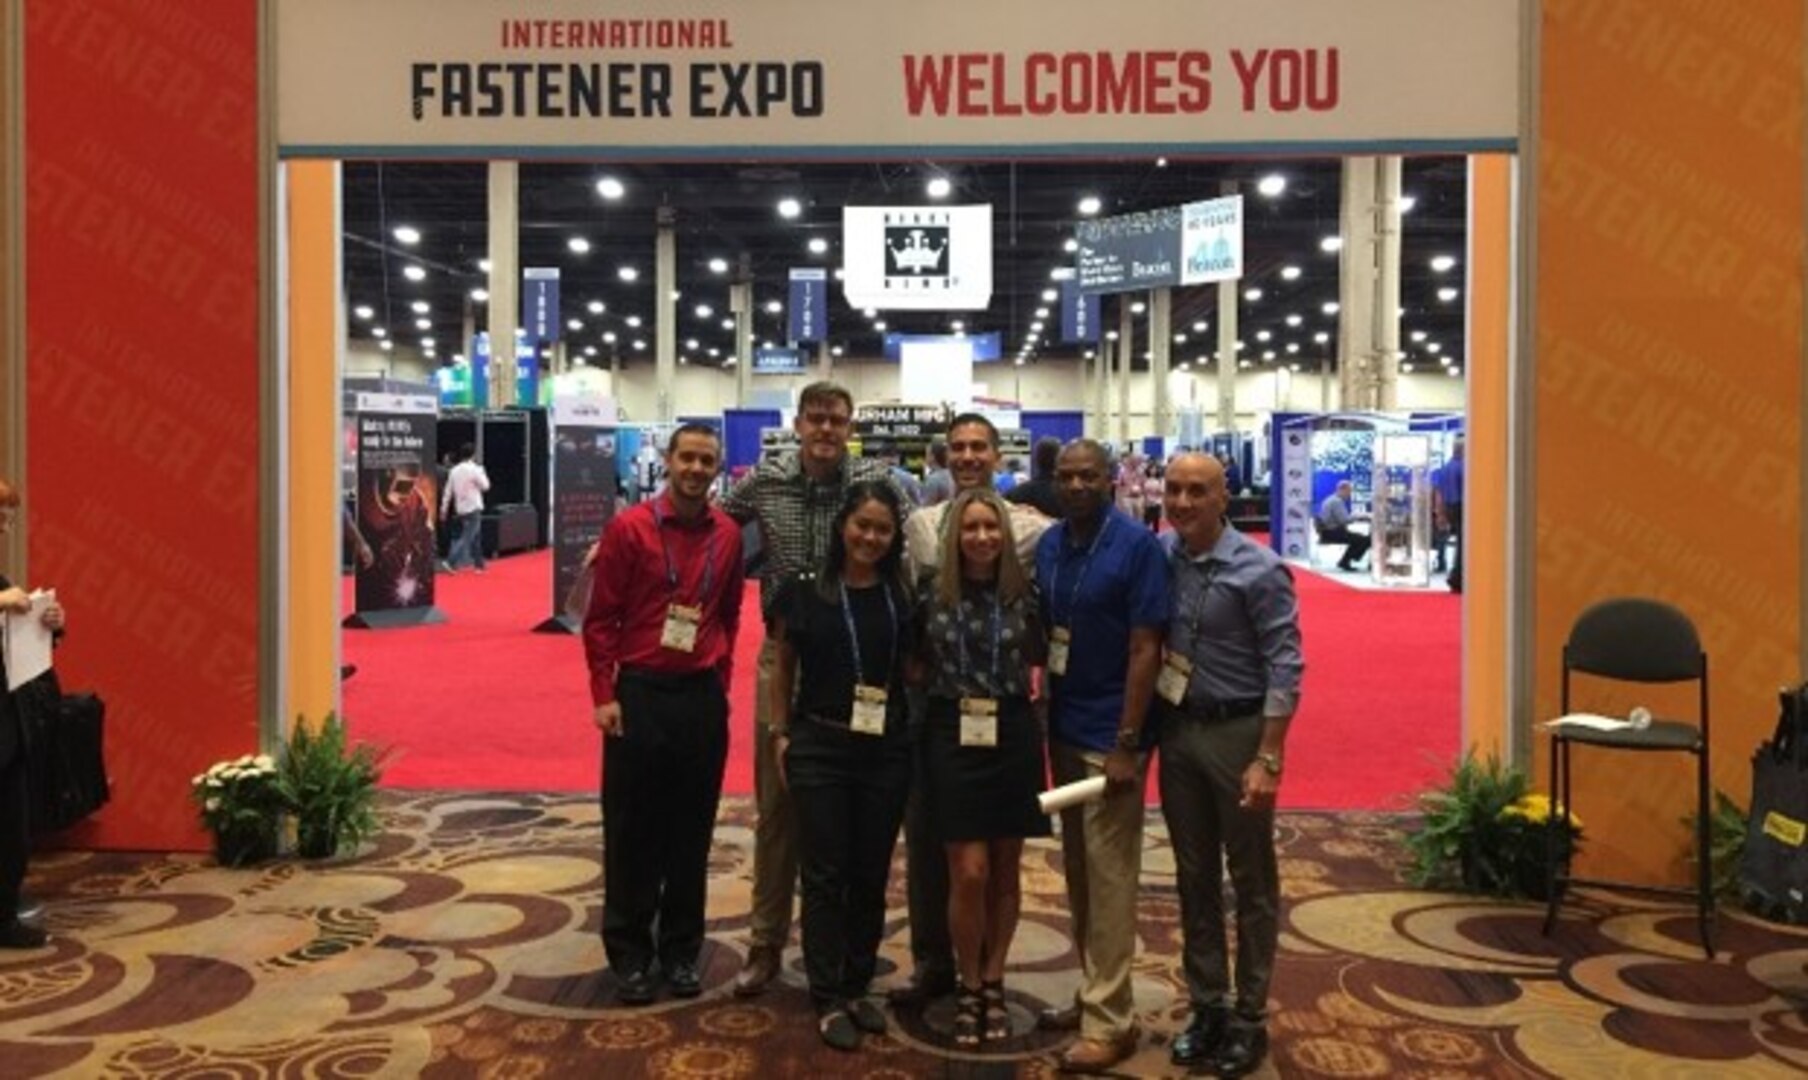 DLA Troop Support Industrial Hardware employees pose for a photo Sept. 29, 2019 at the entrance to the International Fastener Expo in Las Vegas, Nevada.